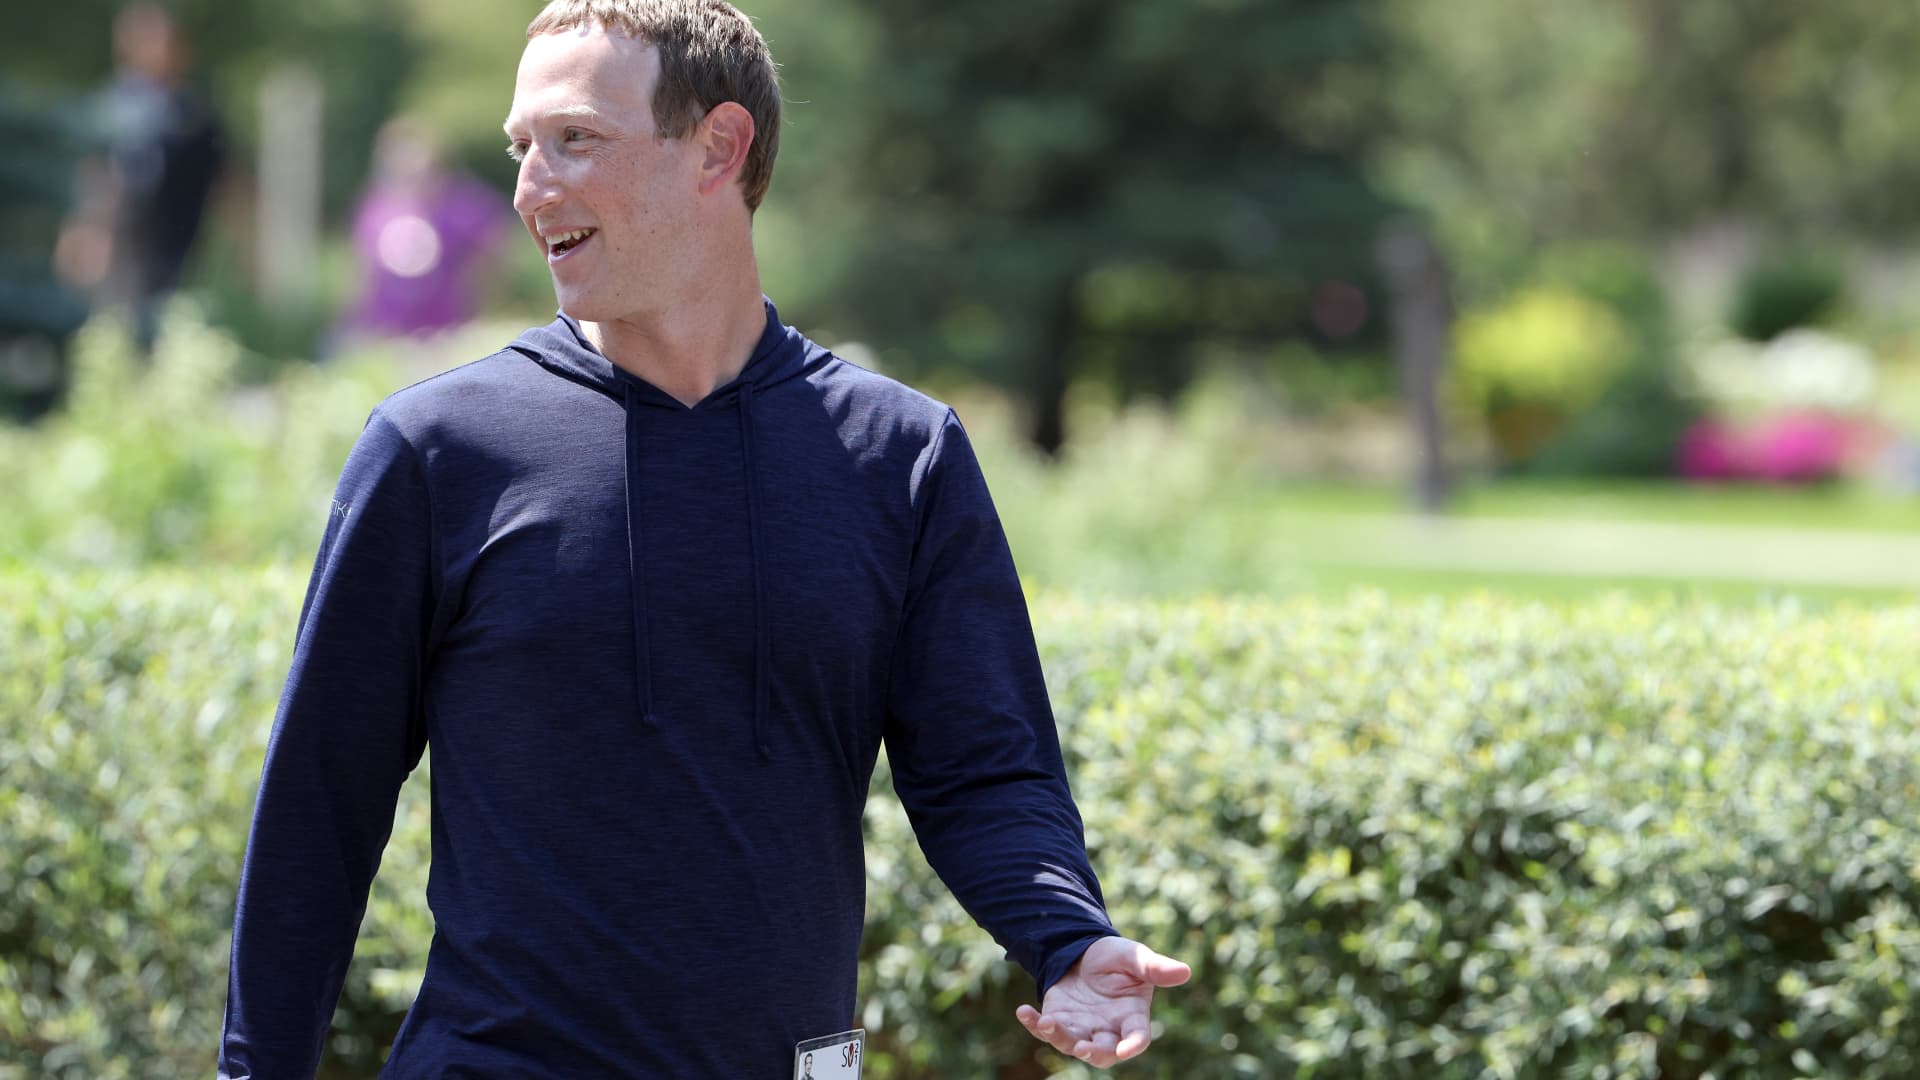 Mark Zuckerberg says Apple's App Store policies are not 'sustainable or good place to be'